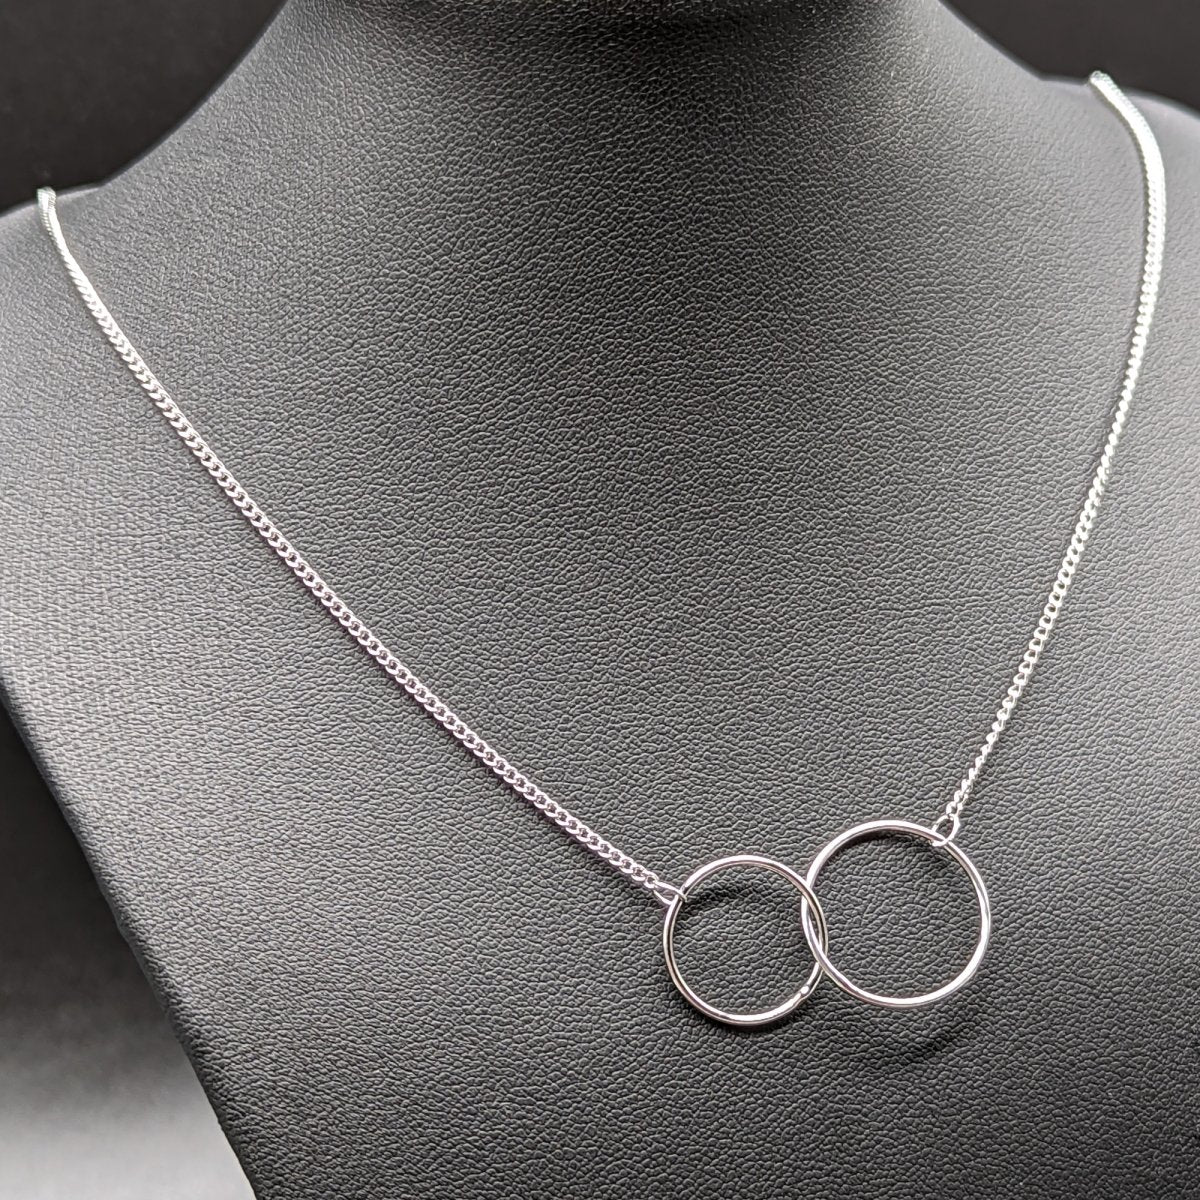 Gift for Memaw - Interlocking Circles Necklace - Meaningful Cards